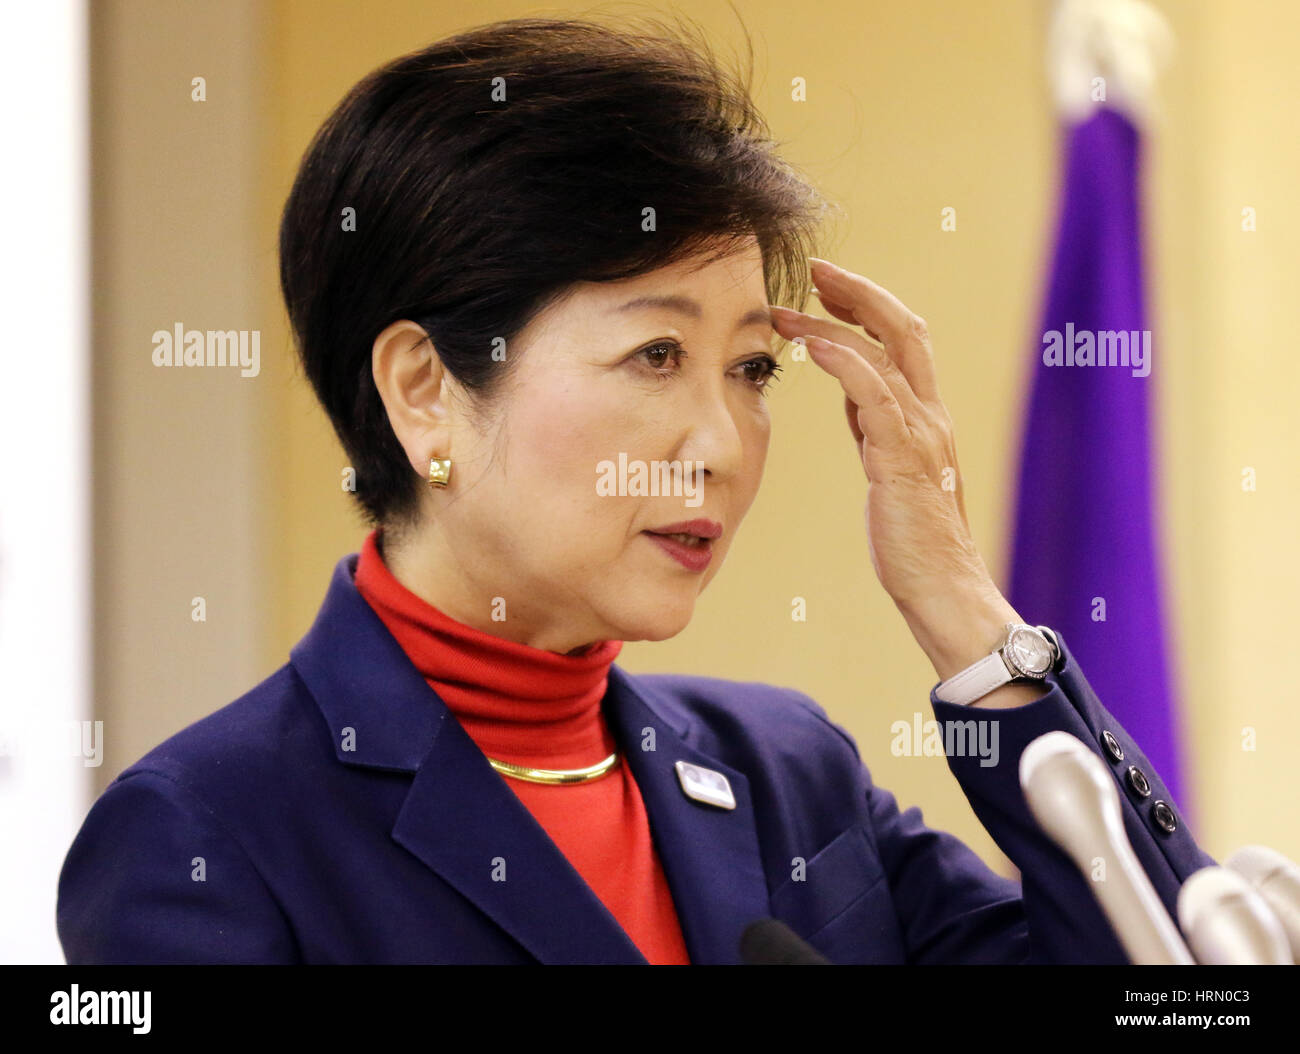 Tokyo, Japan. 3rd March 2017. Tokyo Governor Yuriko Koike speaks before press at the Tokyo Metropolitan Governemnt office in Tokyo on Friday, March 3, 2017. Former Tokyo Governor Shintaro Ishihara held a press conference and he said Koike had responsibility for the Tsukiji market relocation problem. Credit: Yoshio Tsunoda/AFLO/Alamy Live News Stock Photo